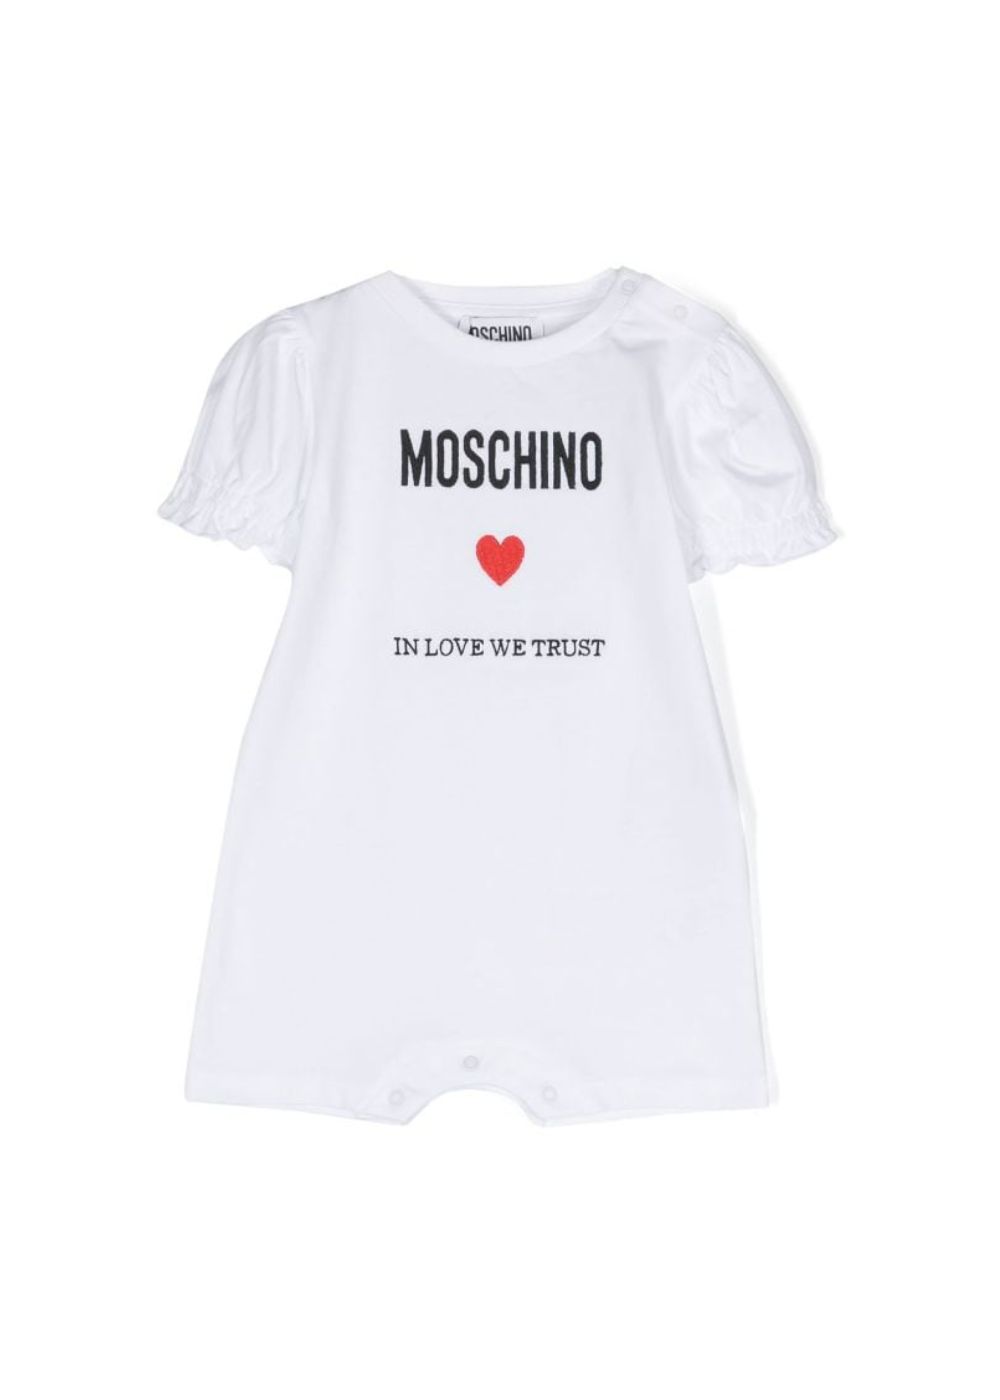 Featured image for “Moschino Tutina con Stampa”